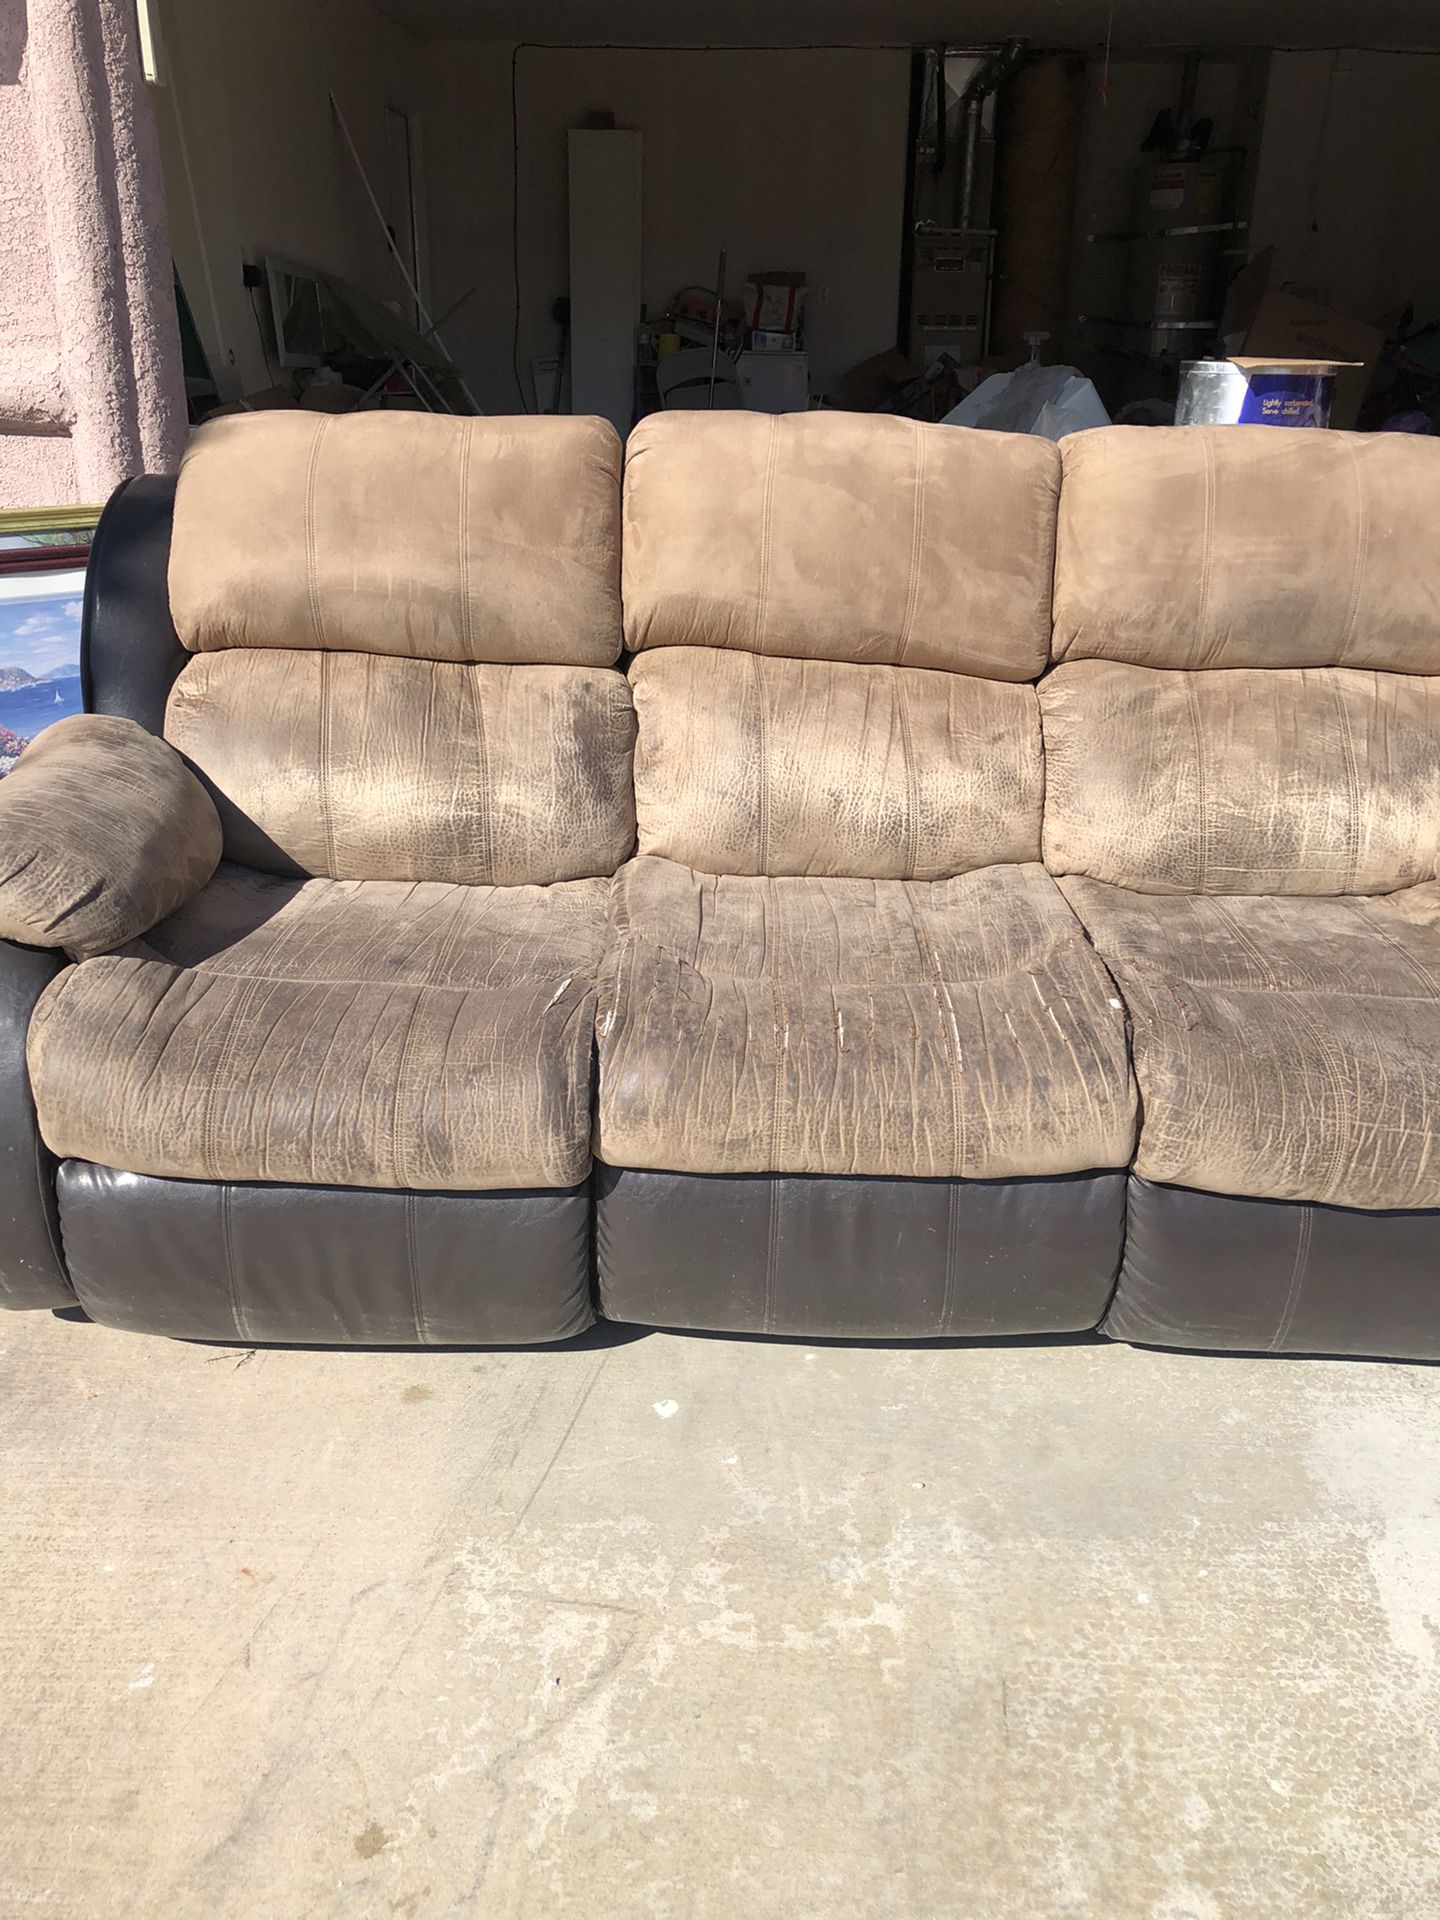 2 recliner couches